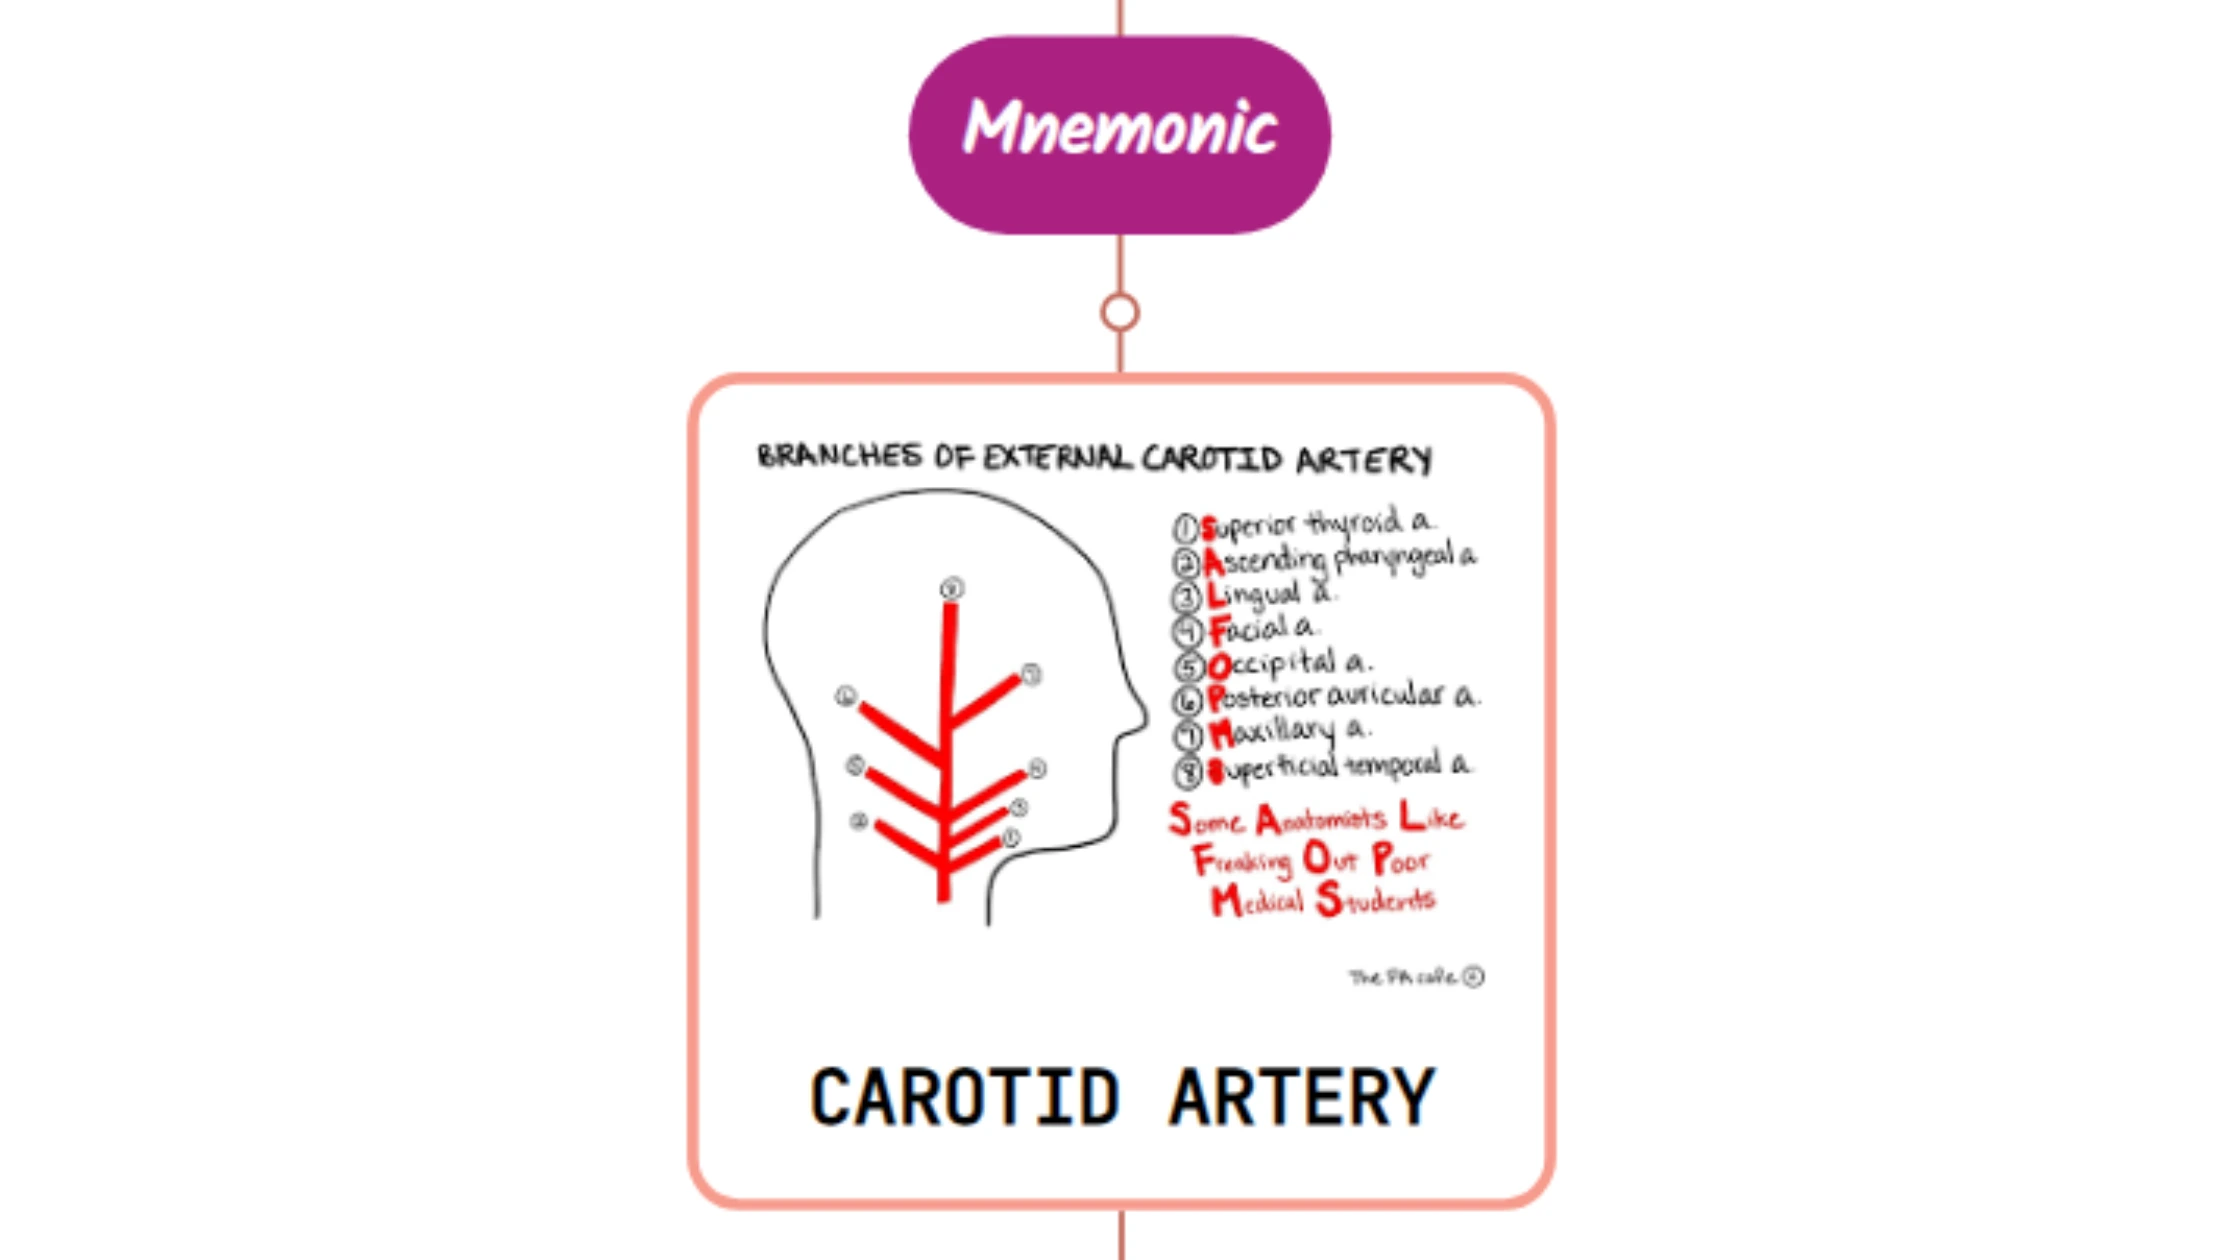 You are currently viewing External Carotid Artery Branches- Mnemonic